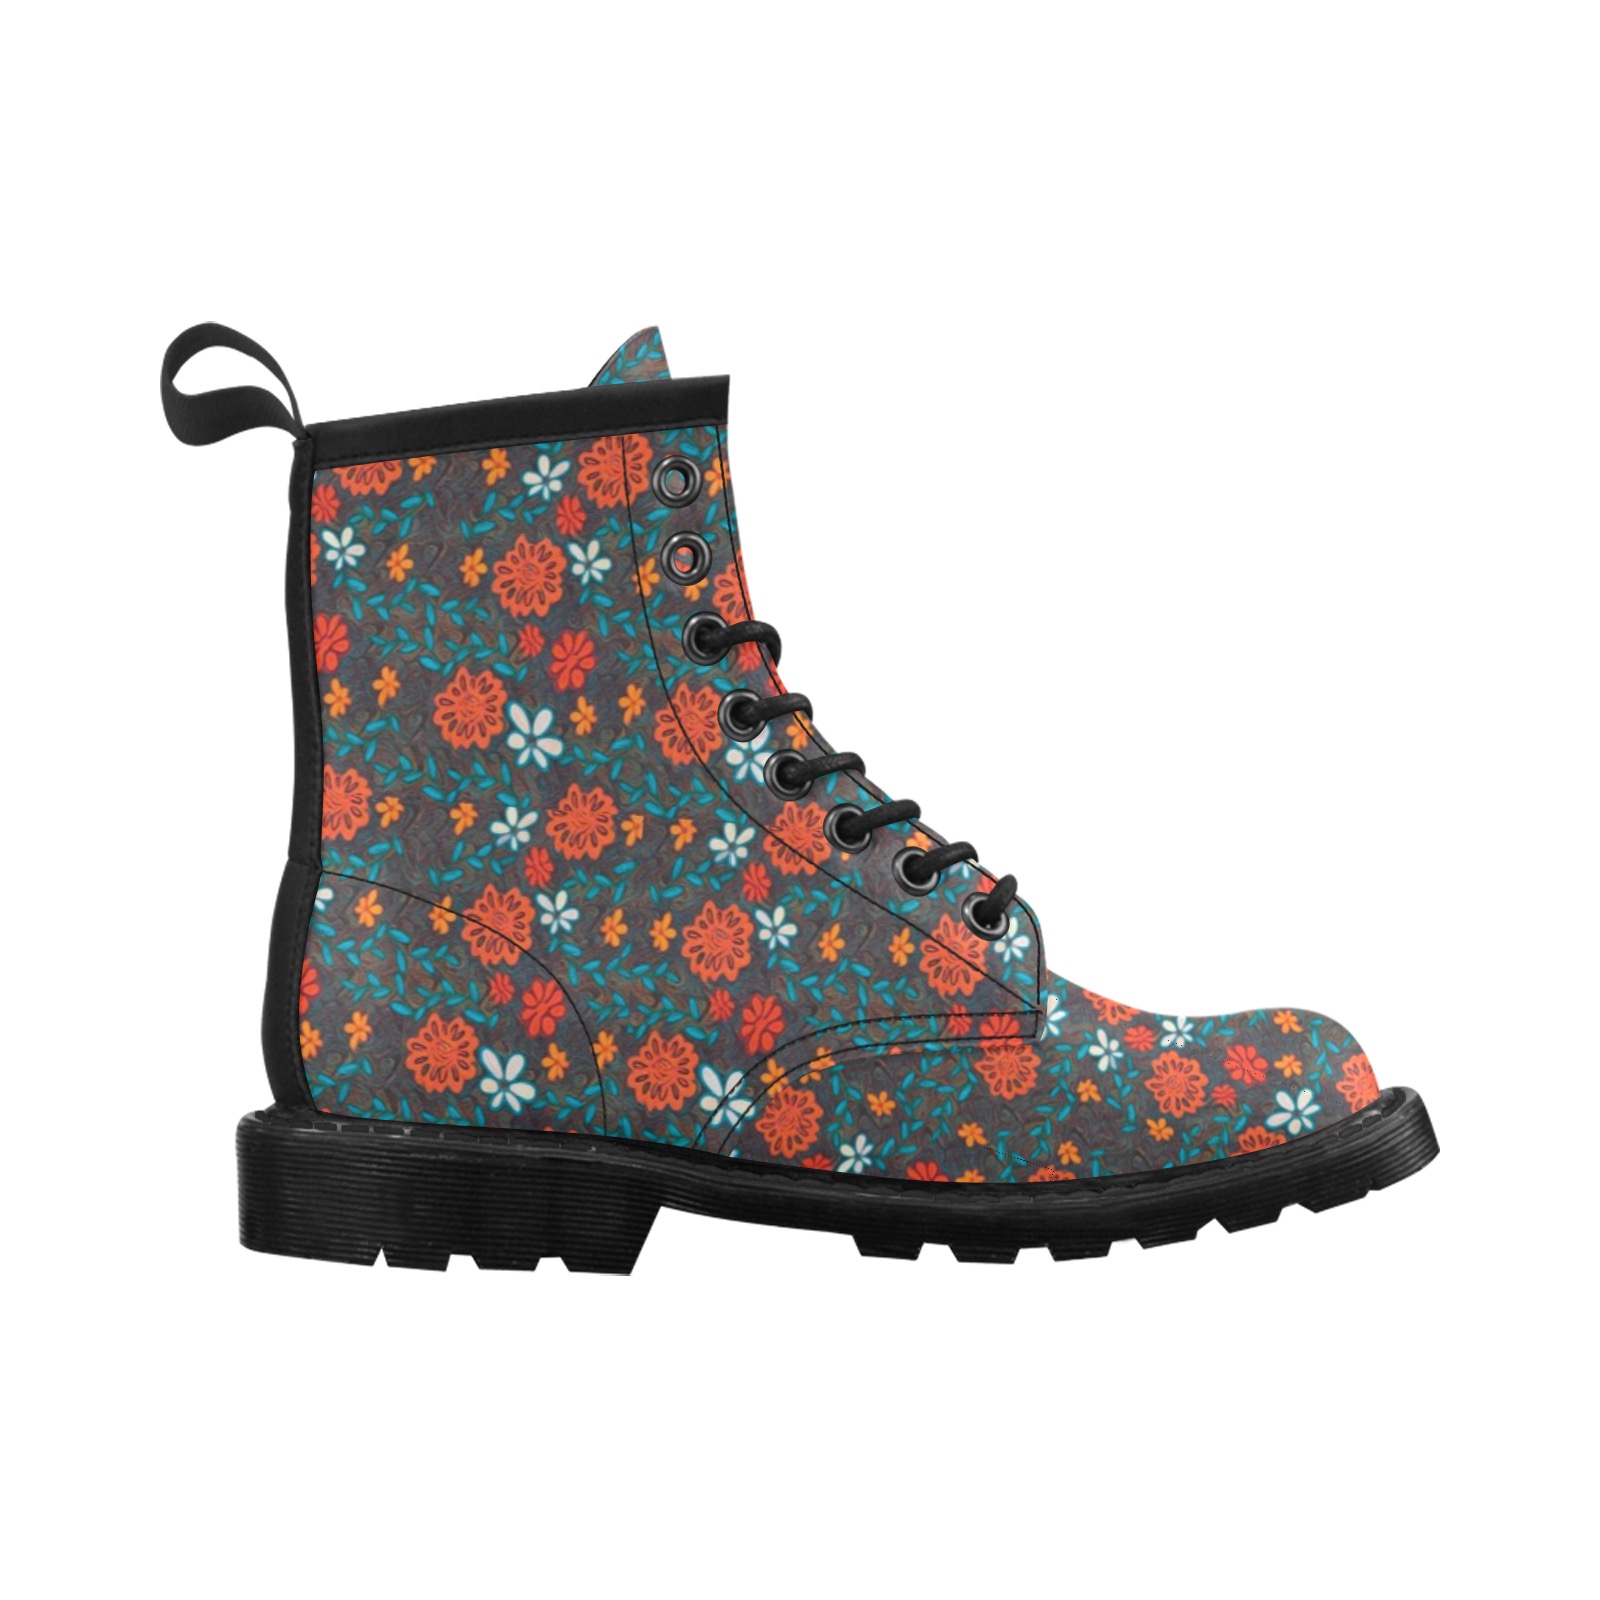 Pretty floral pattern Women's PU Leather Martin Boots (Model 402H)